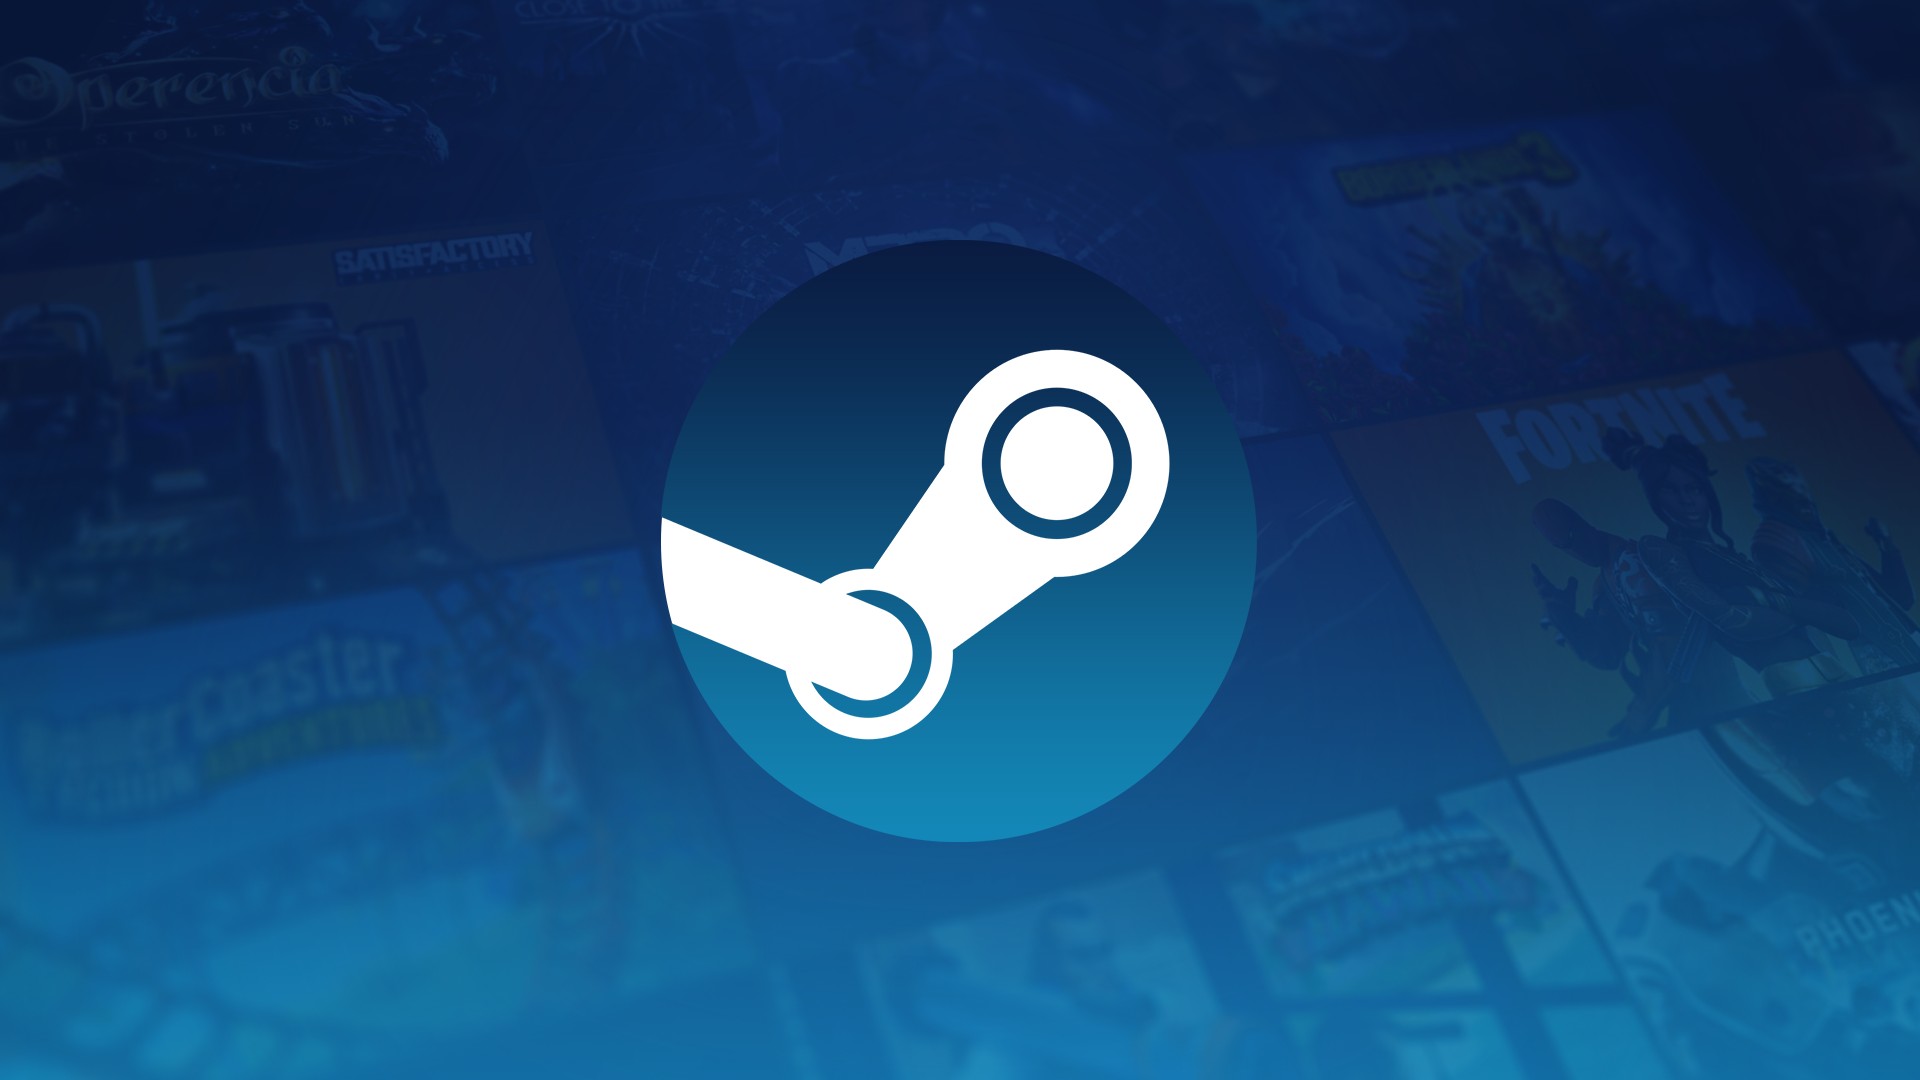  Success!  Steam surpasses 31 million concurrent users and sets new record
